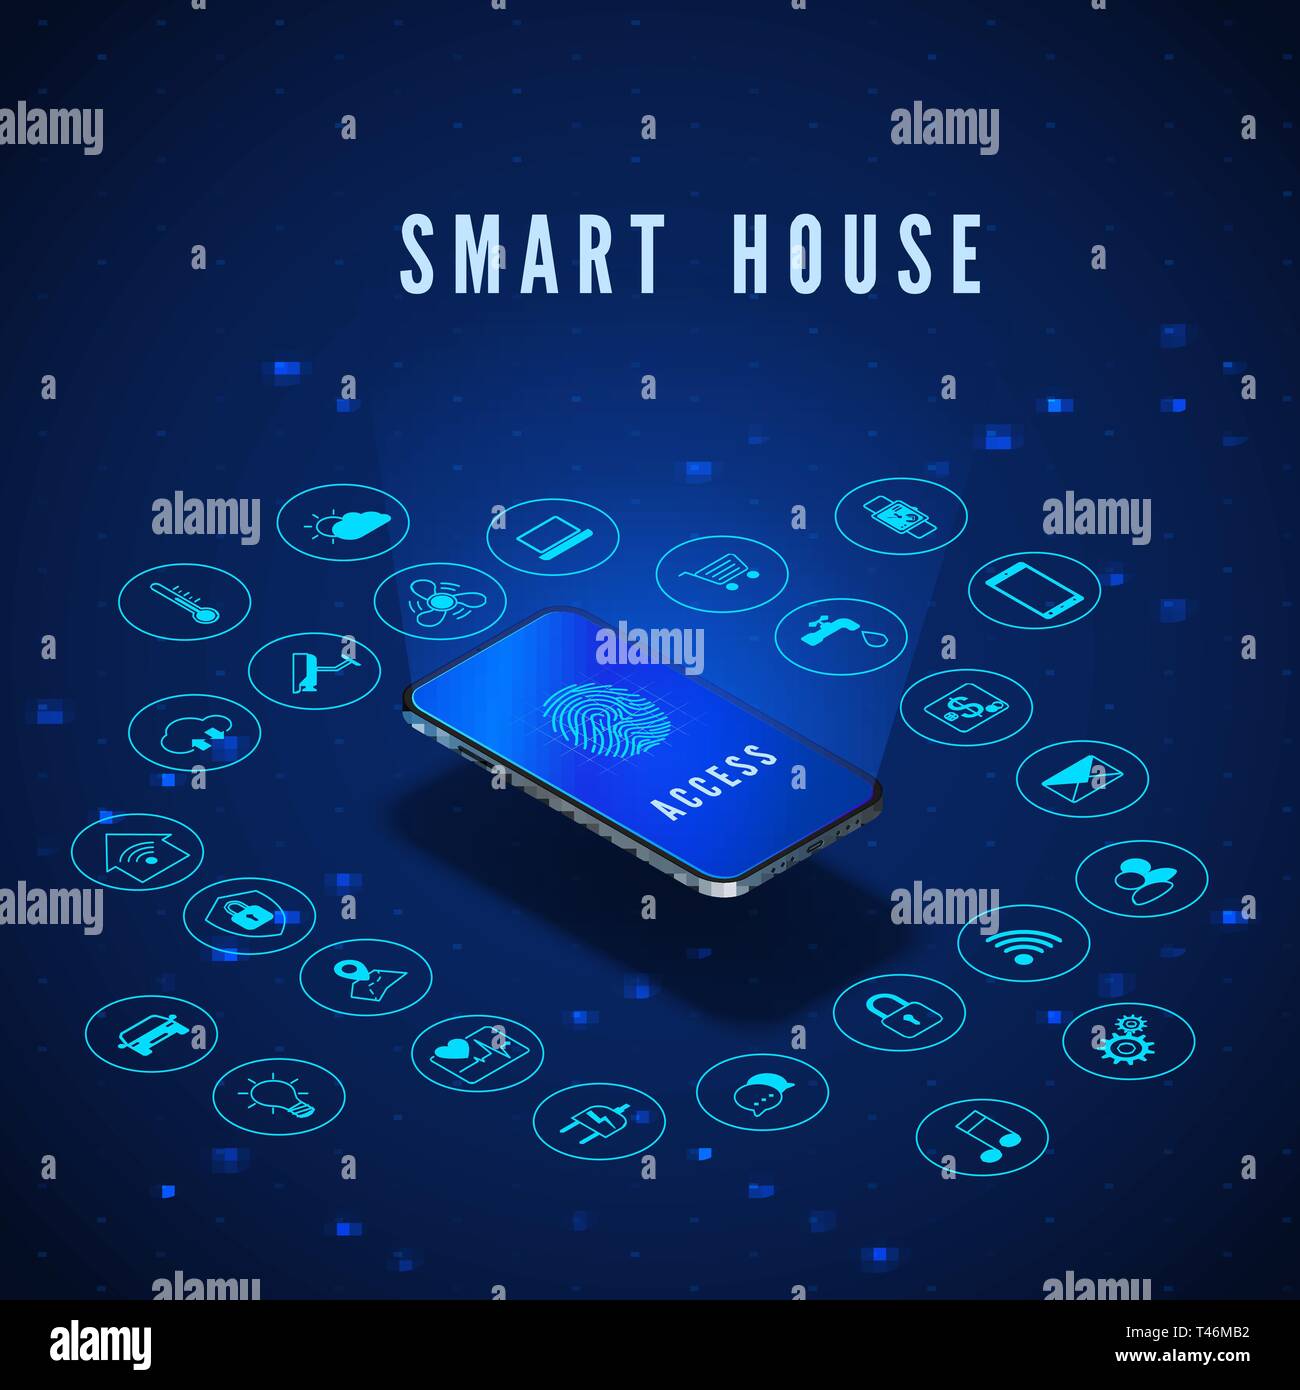 Smart House Banner. Smartphone with Fingerprint on Screen and Icons Set. Smart Home Monitoring and Control Systems. Vector Illustration Stock Vector